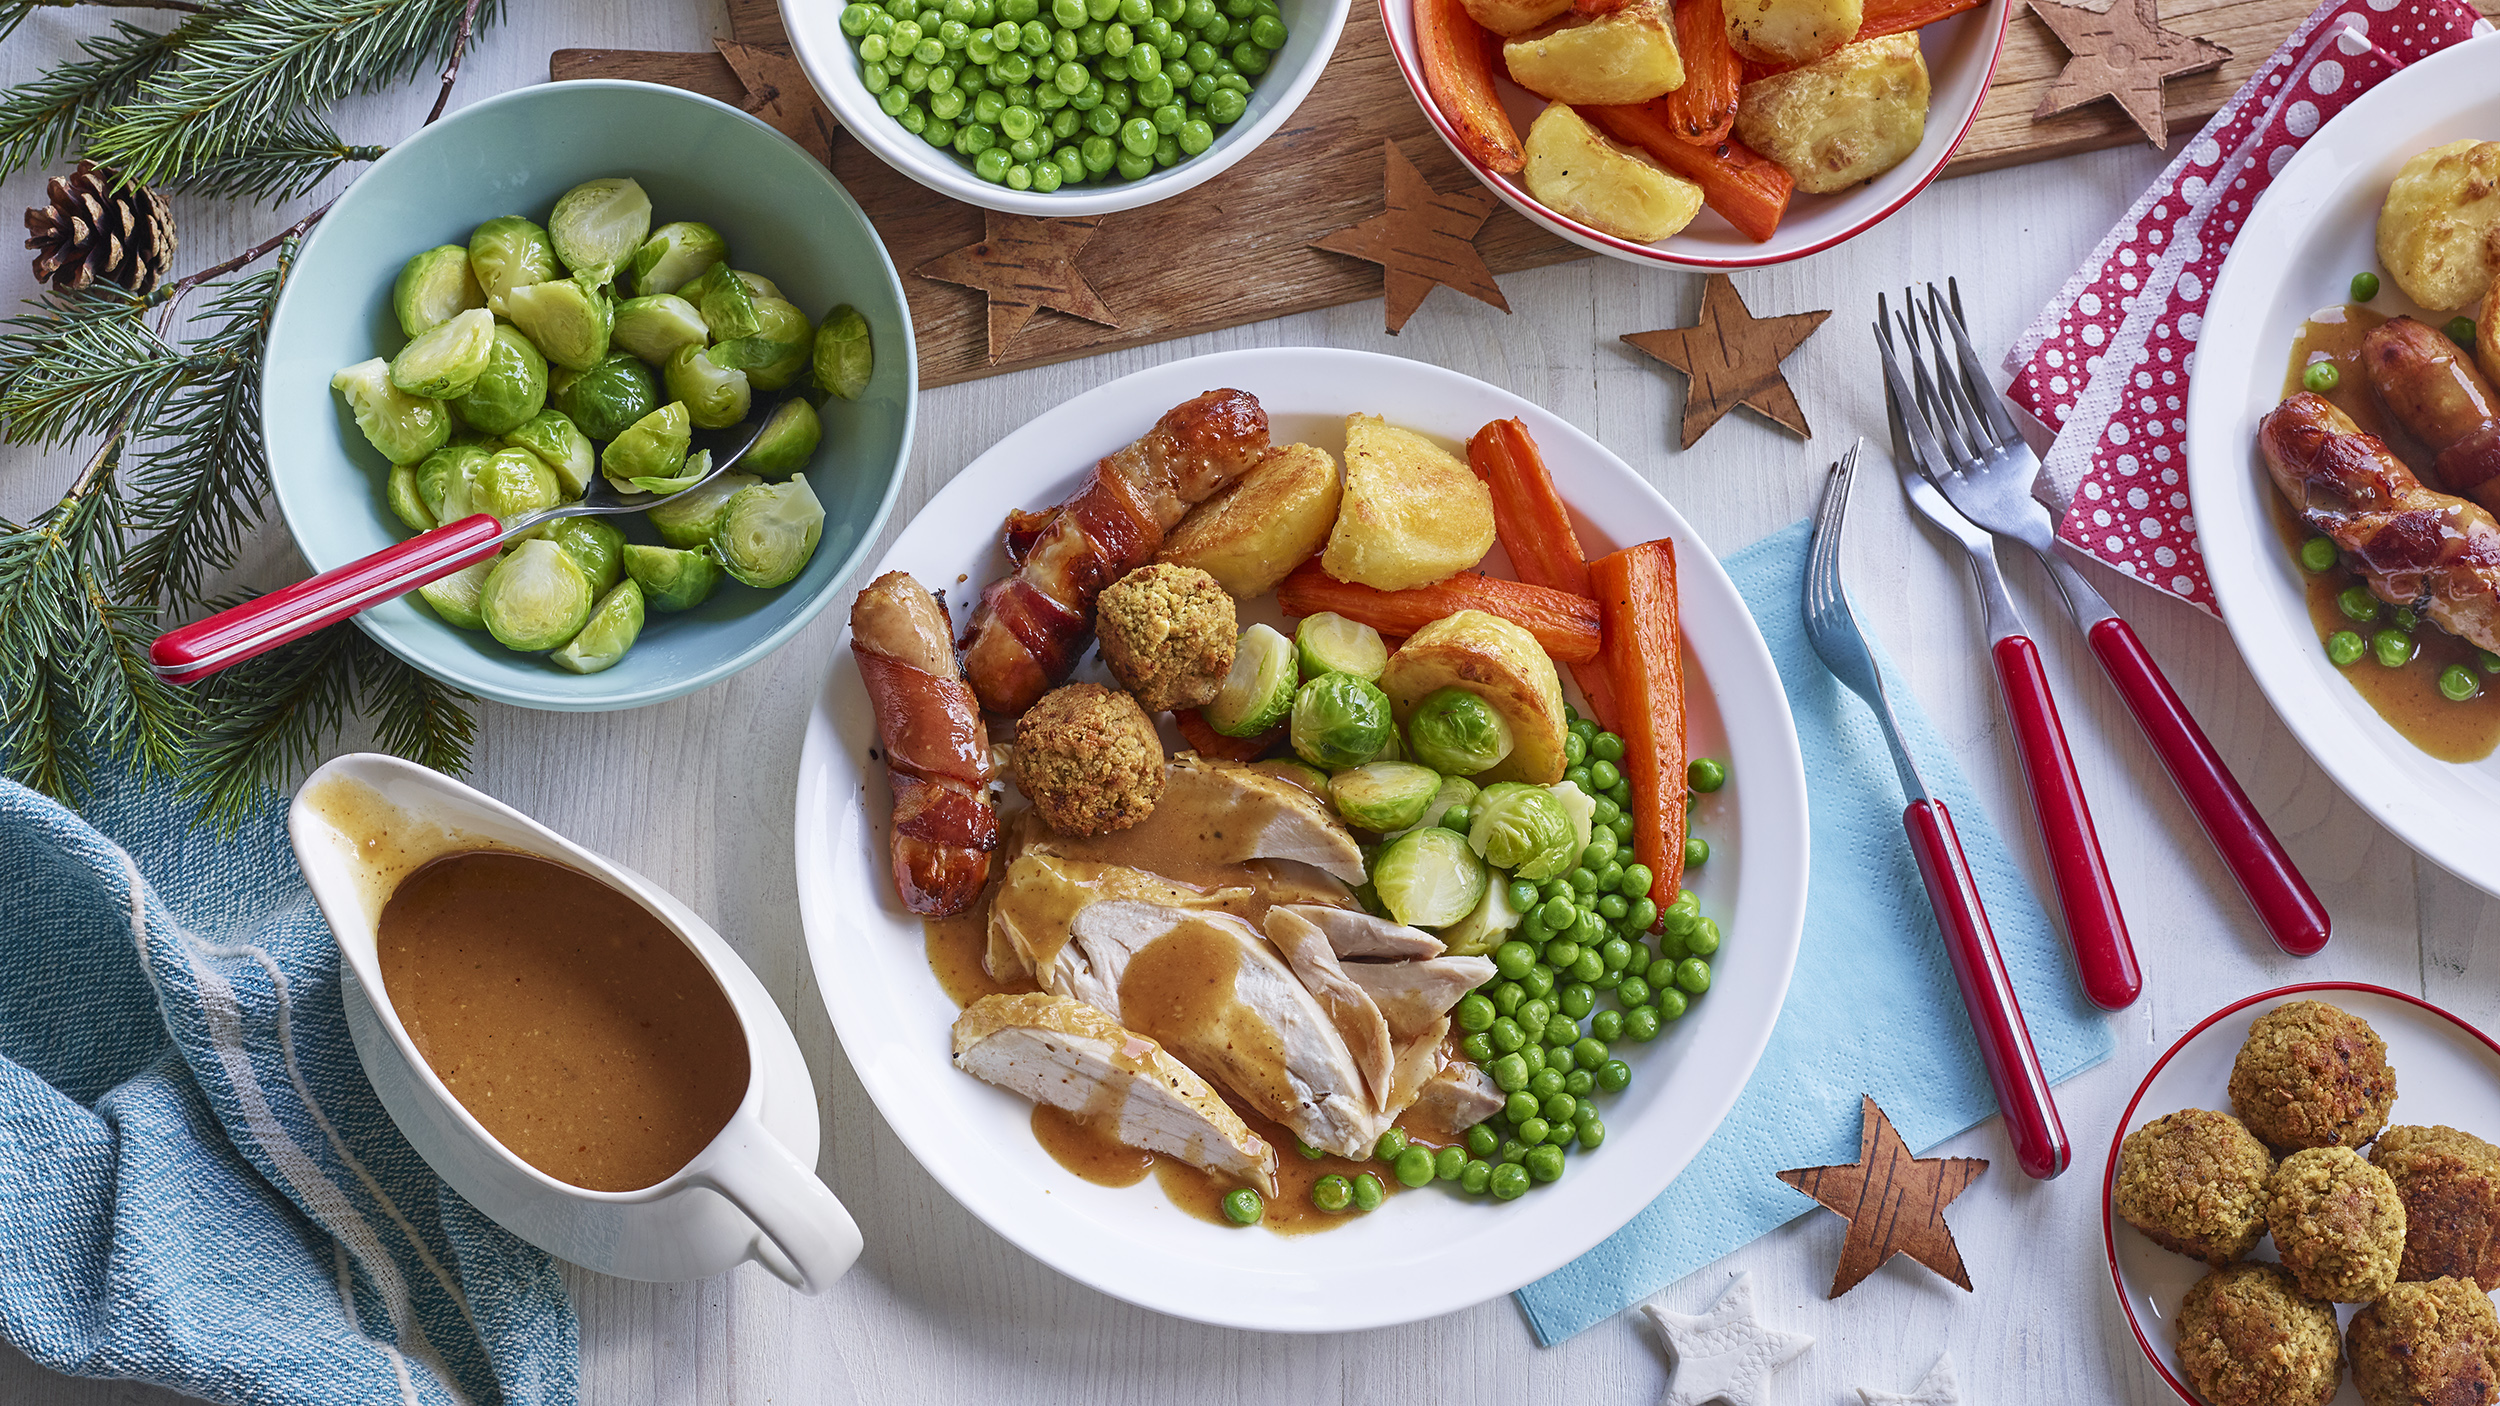 https://food-images.files.bbci.co.uk/food/recipes/budget_christmas_dinner_51479_16x9.jpg